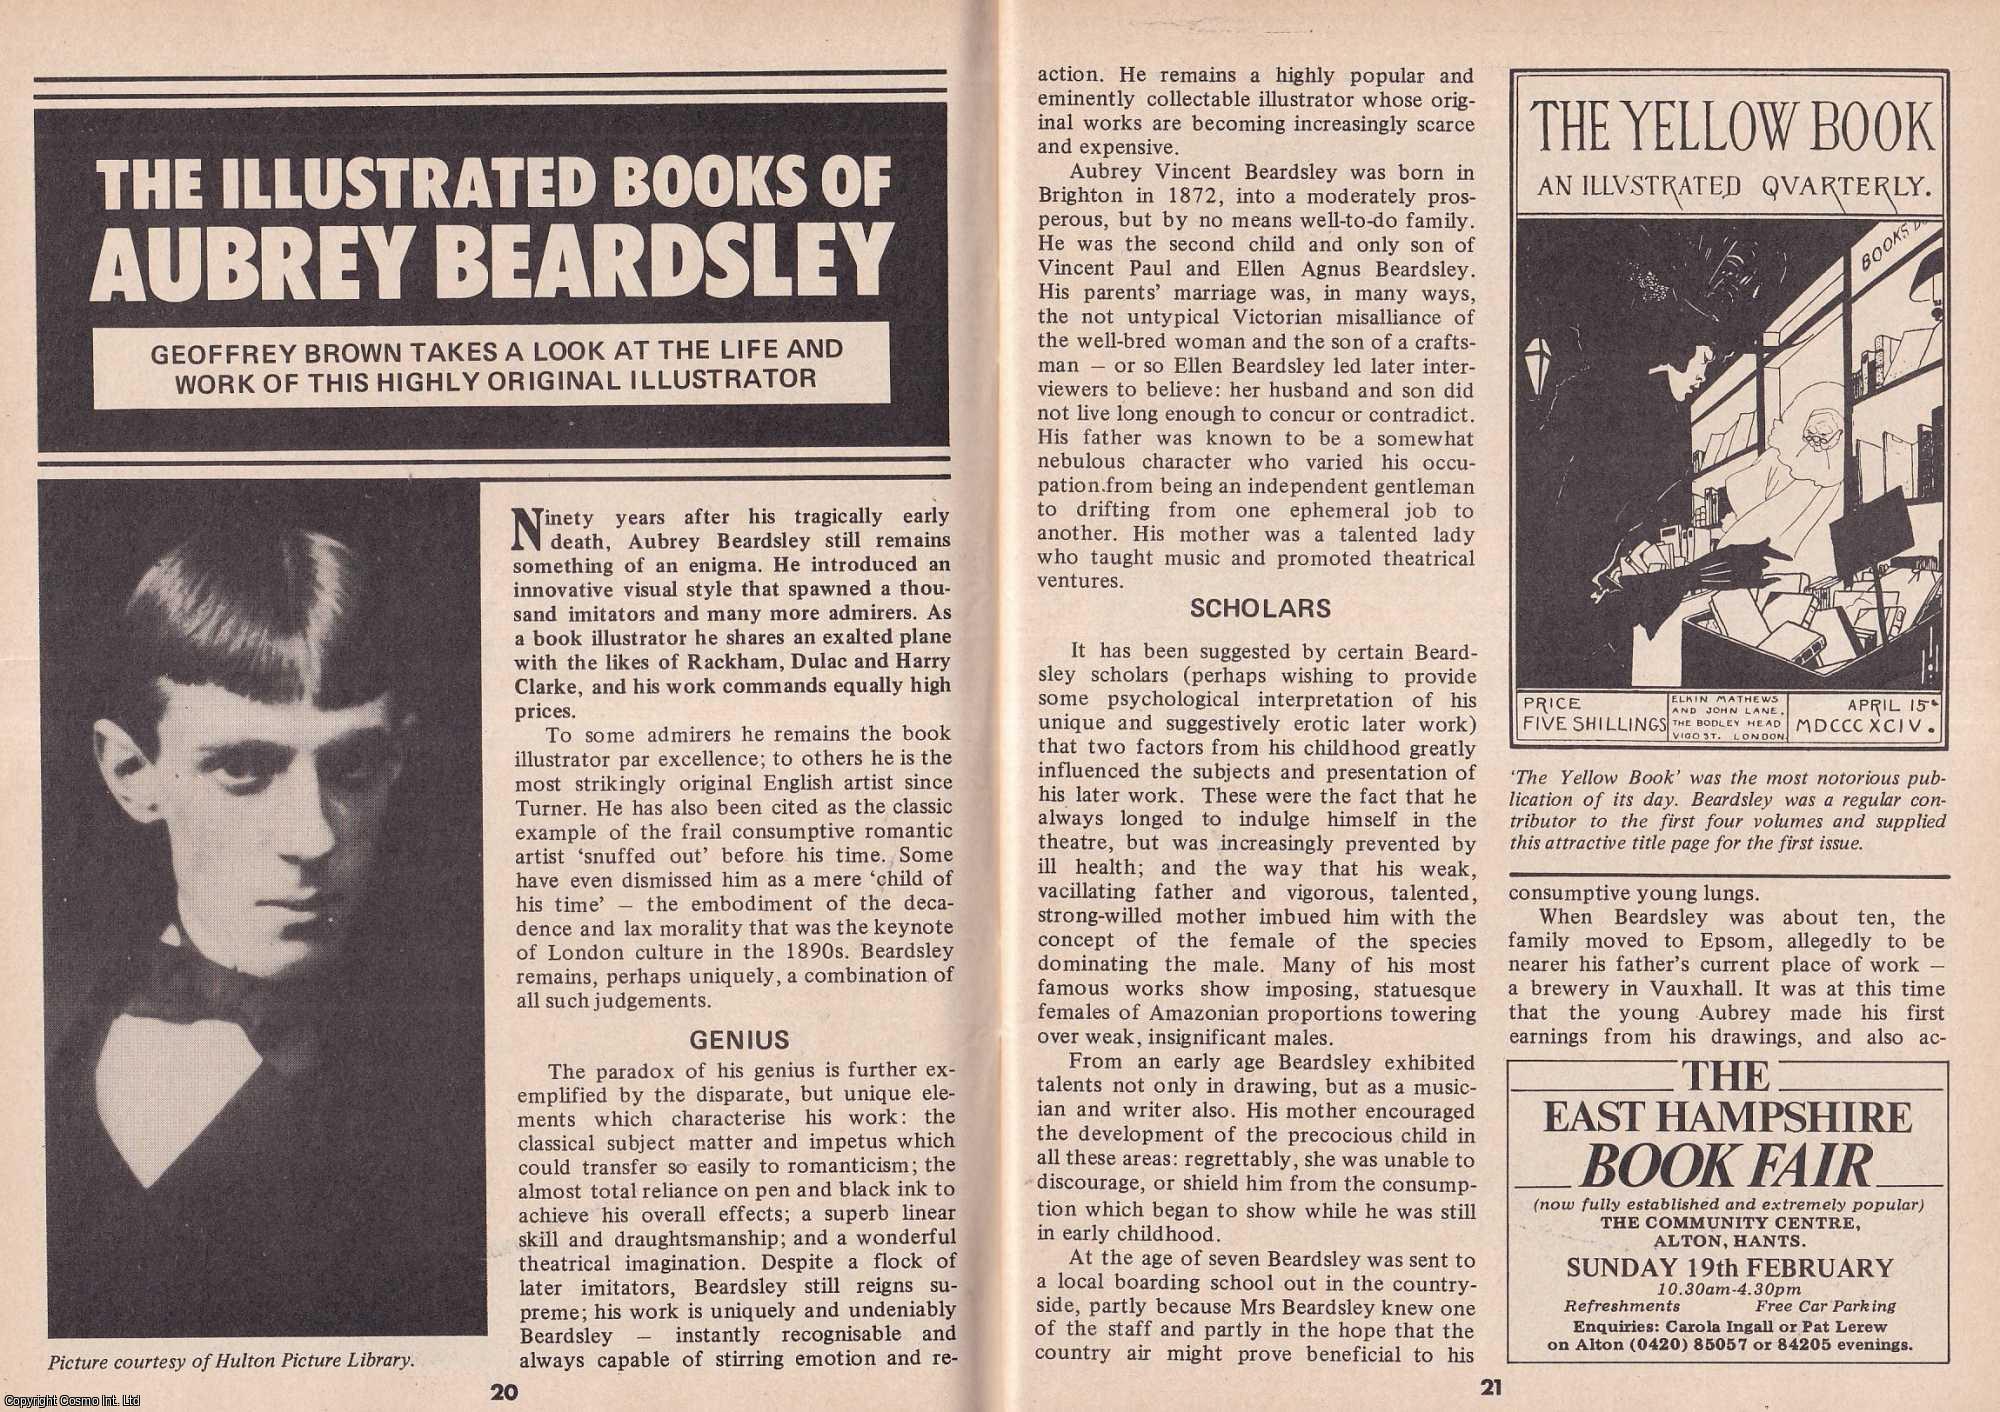 Geoffrey Brown - The Illustrated Books of Aubrey Beardsley. Looking at The Life and Works of The Illustrator. This is an original article separated from an issue of The Book & Magazine Collector publication.